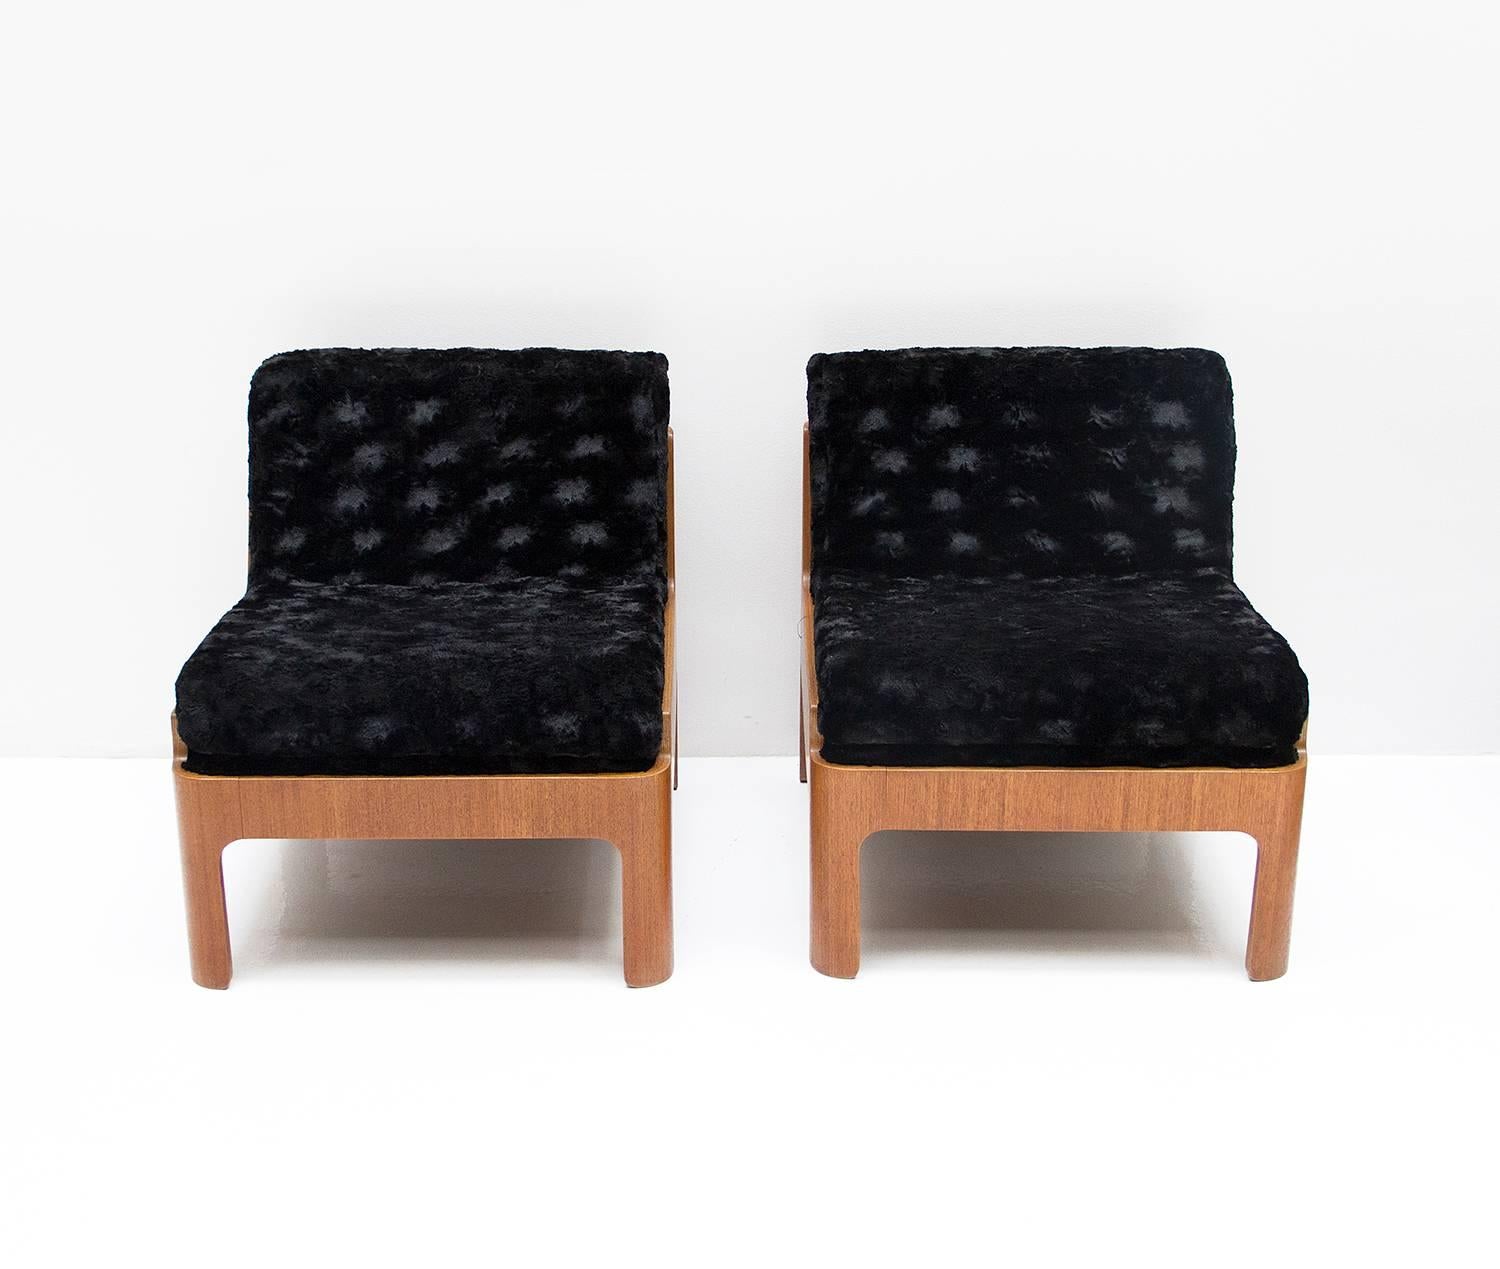 Japanese Pair of Armchairs Designed by Isamu Kenmochi, Manufactured in Tendo Mokko, 1960s For Sale